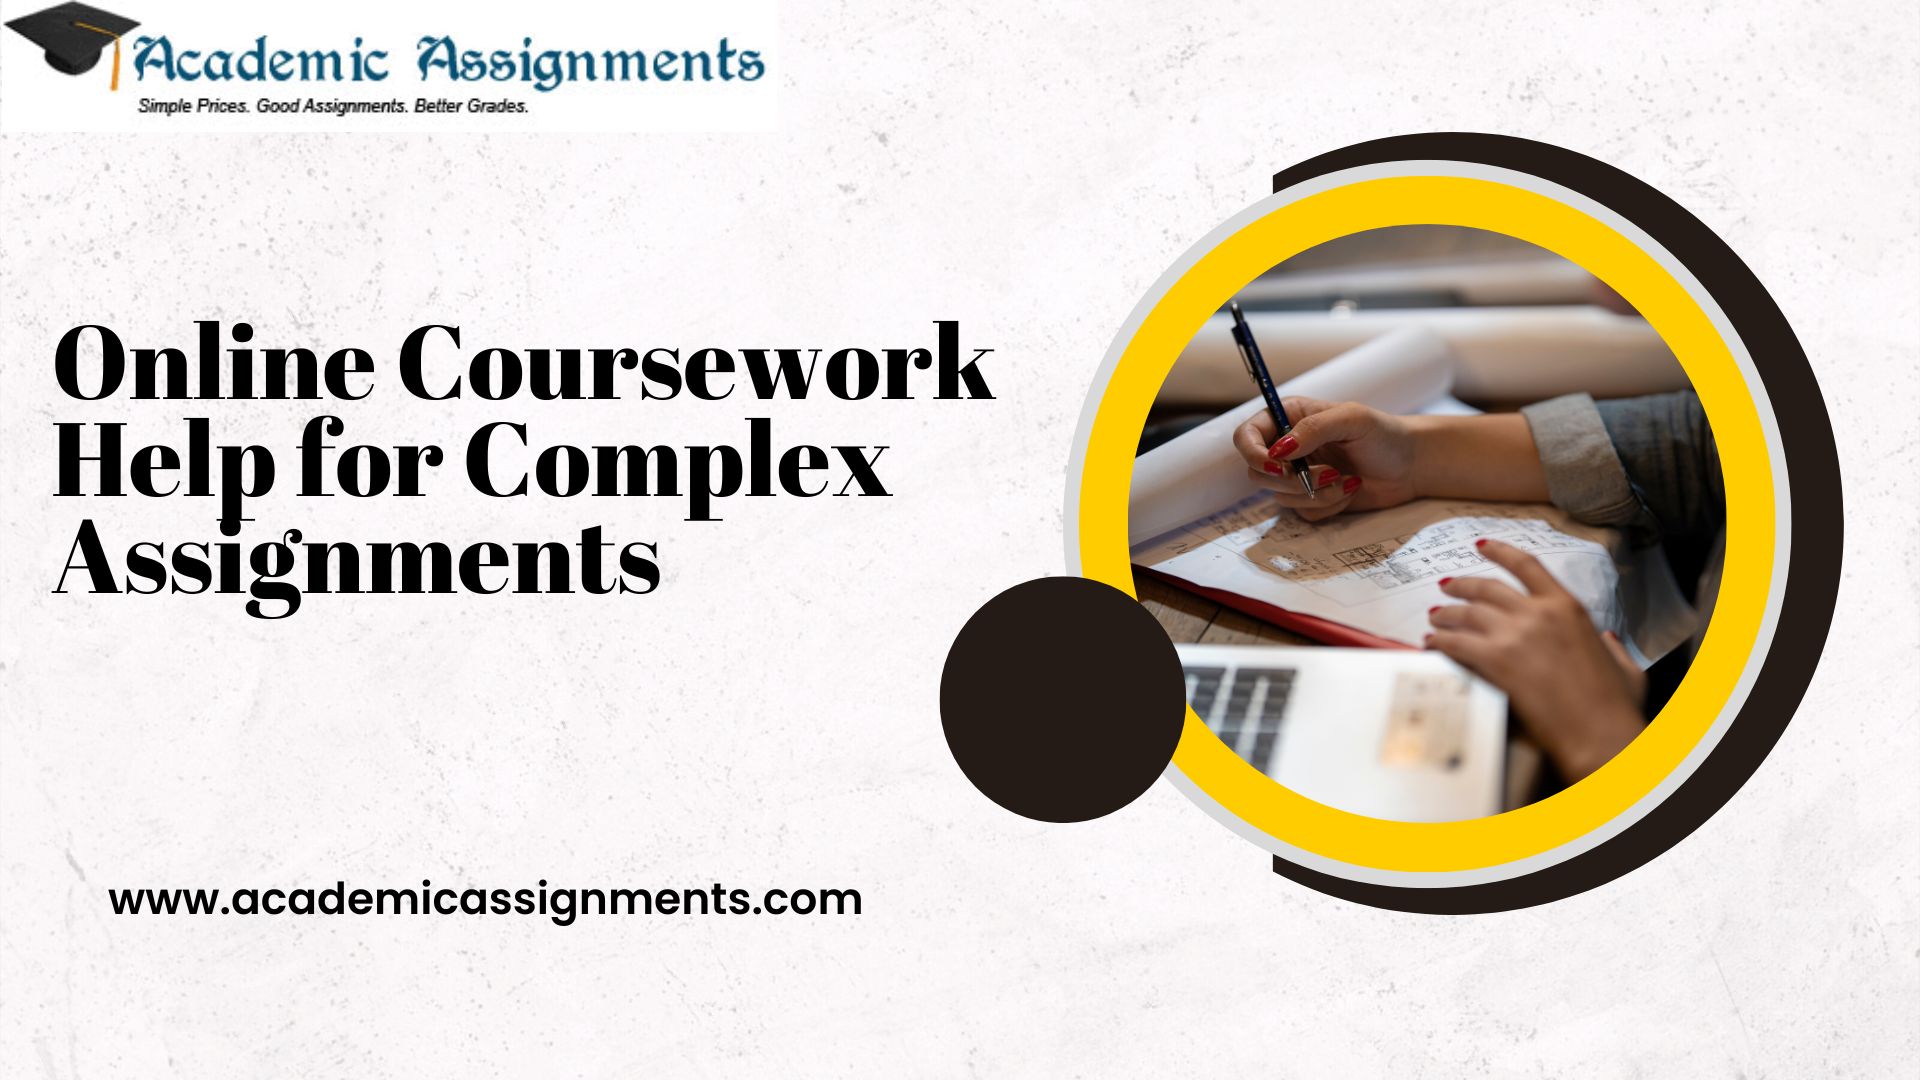 Online Coursework Help for Complex Assignments